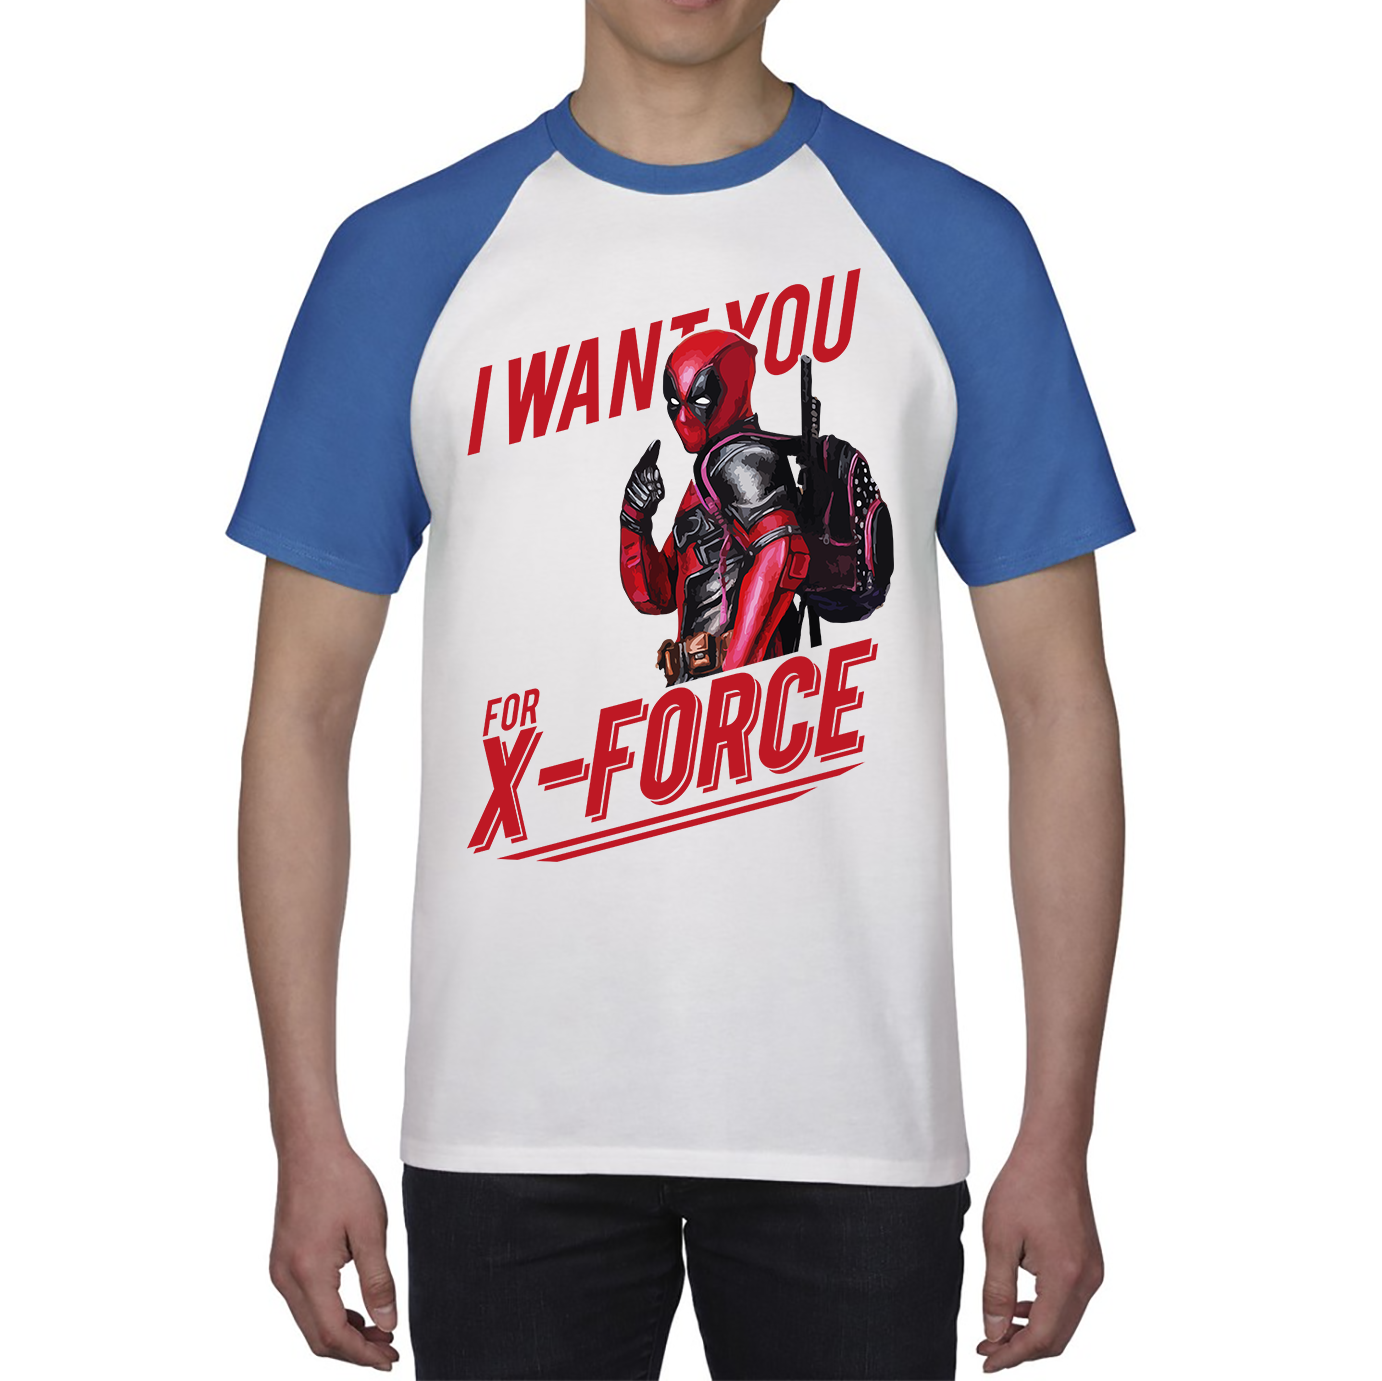 I Want You For X-Force, Deadpool Inspired Baseball T Shirt